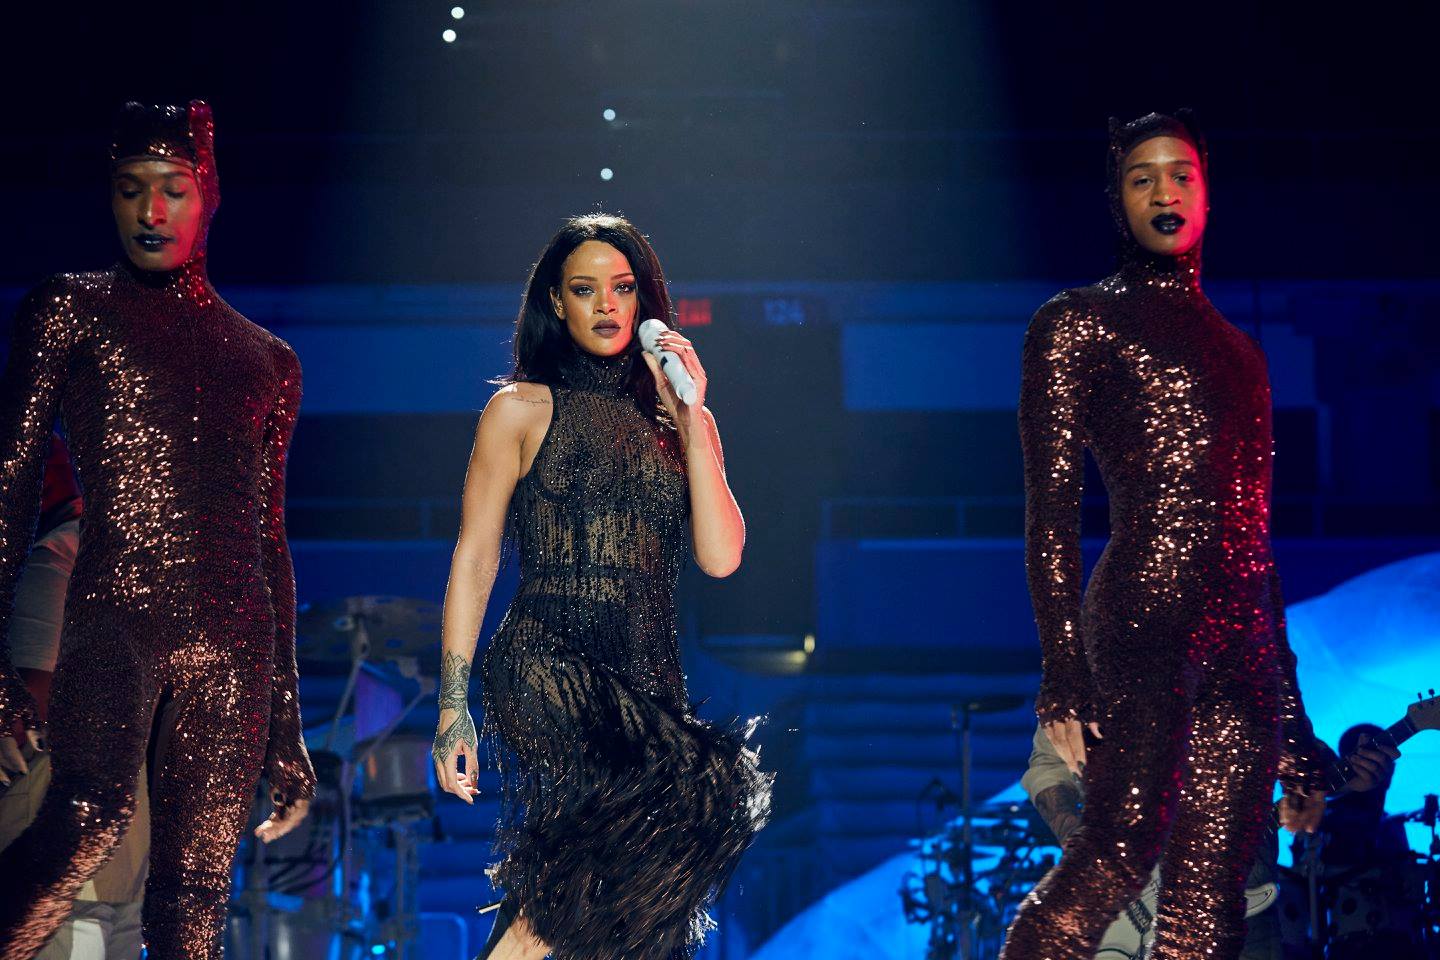 Will you be catching Rihanna on tour?!